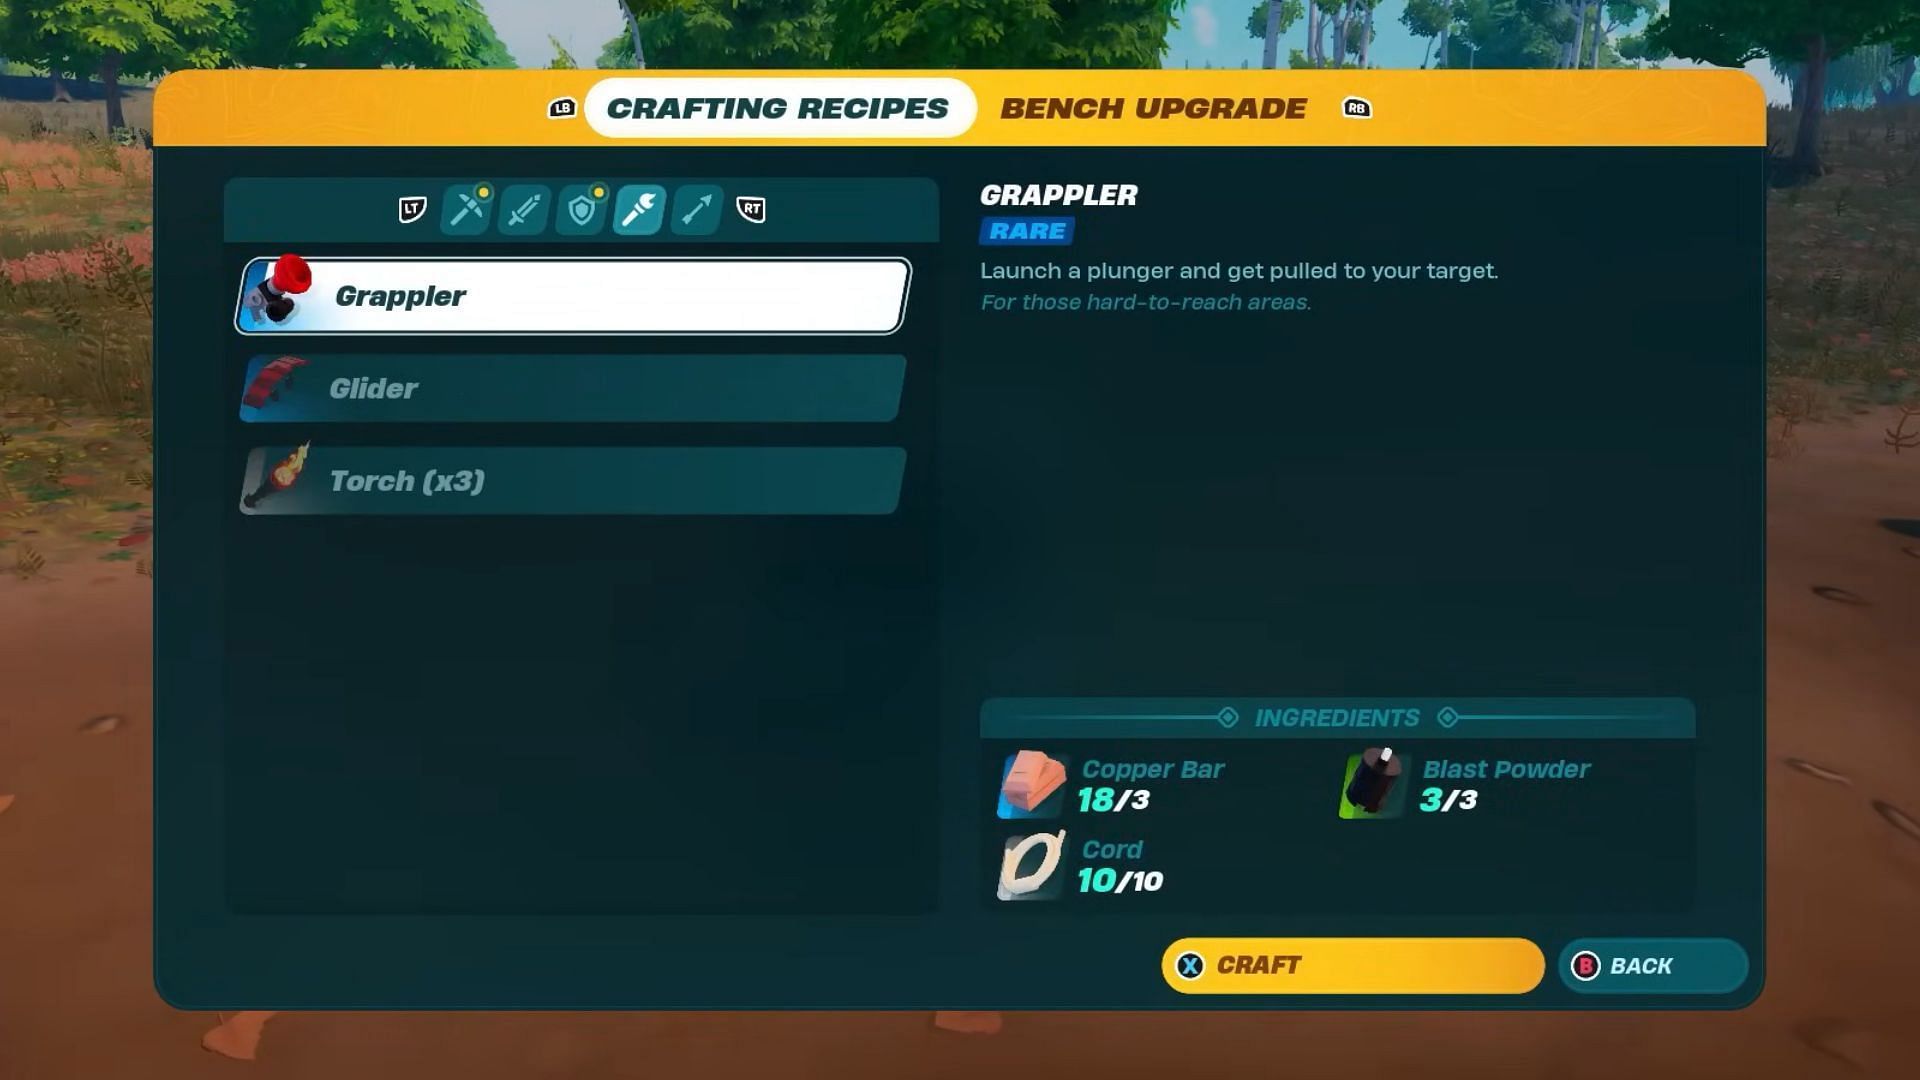 Crafting the Grappler (Image via Perfect Score on YouTube)